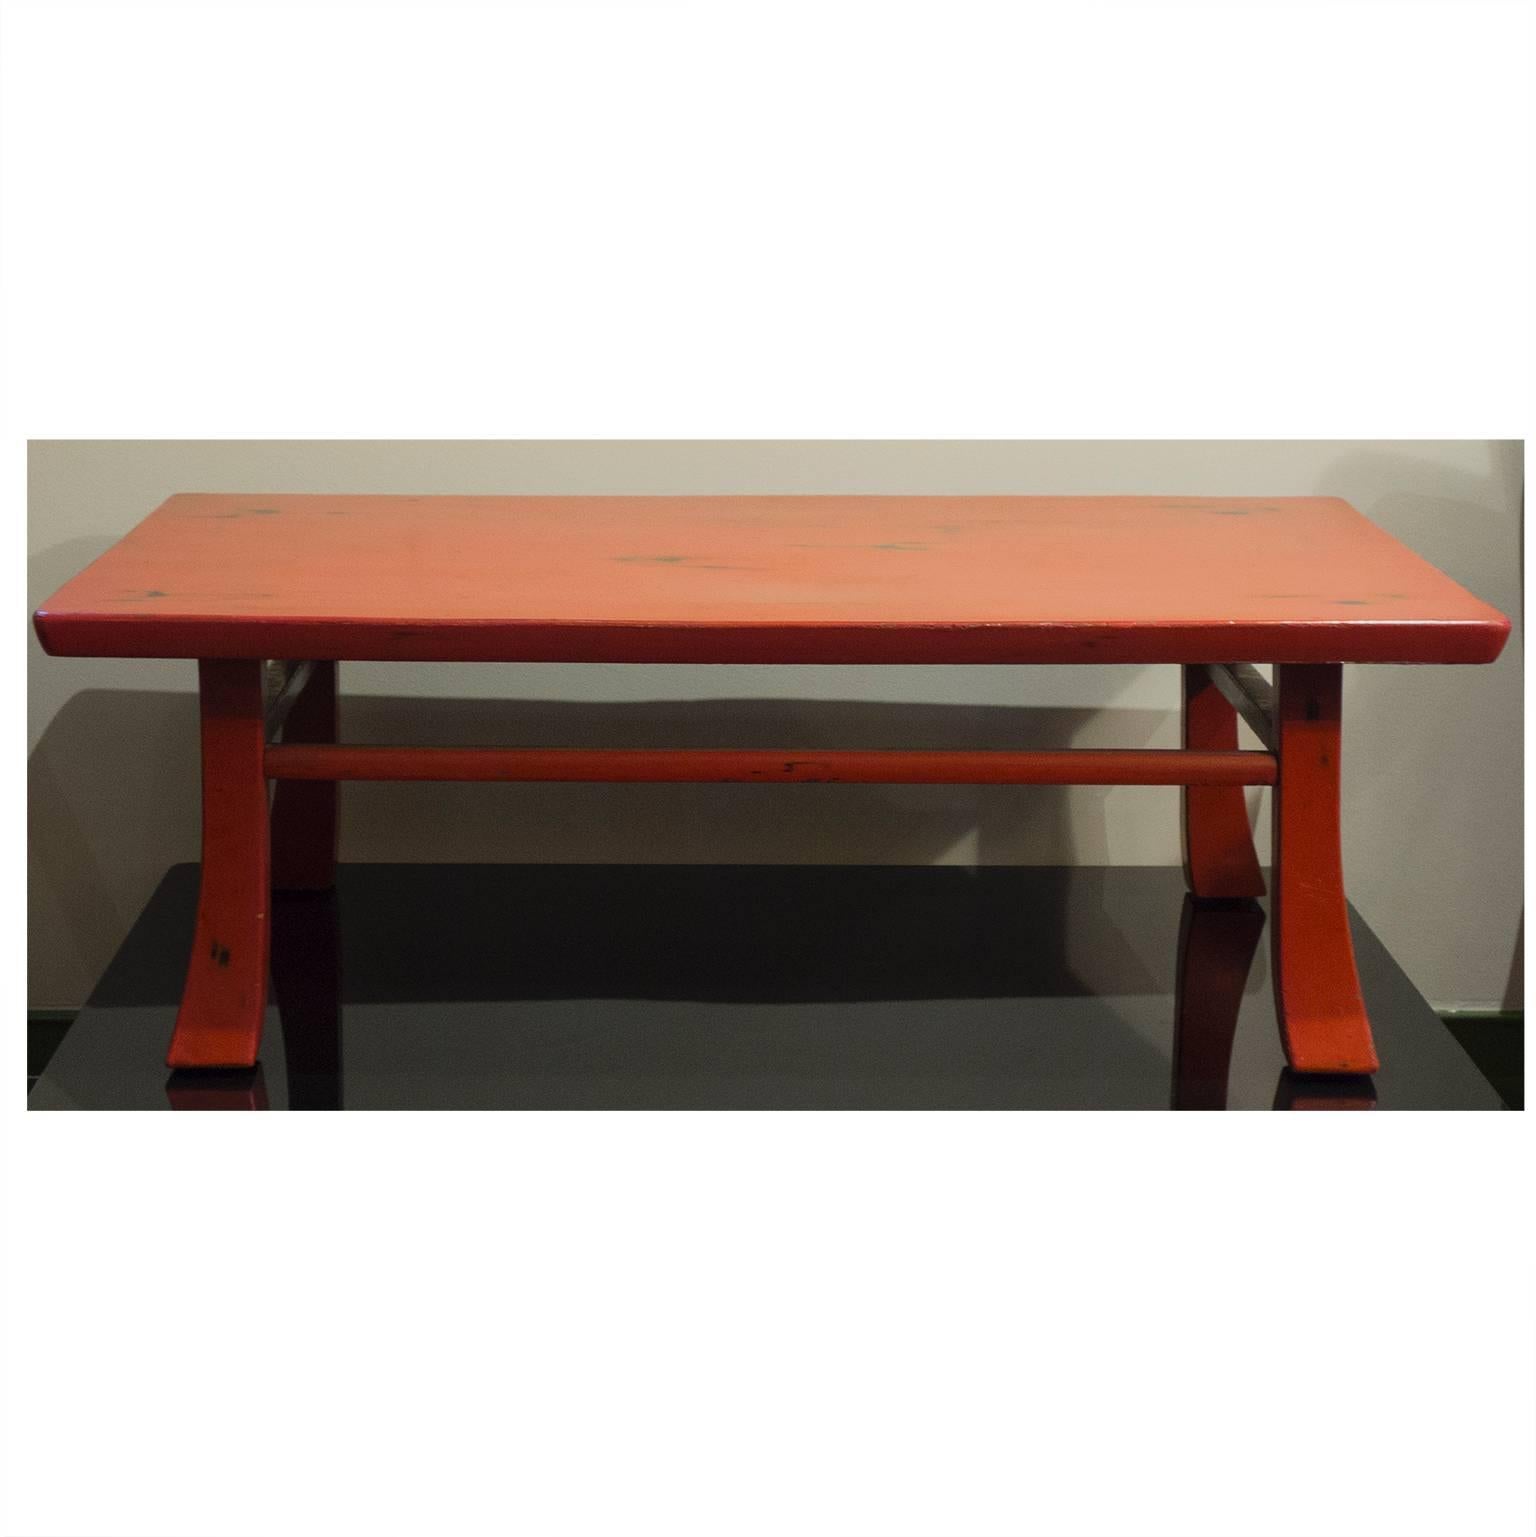 Vintage Japanese style low table in Negoro Nuri red and black lacquer finish.